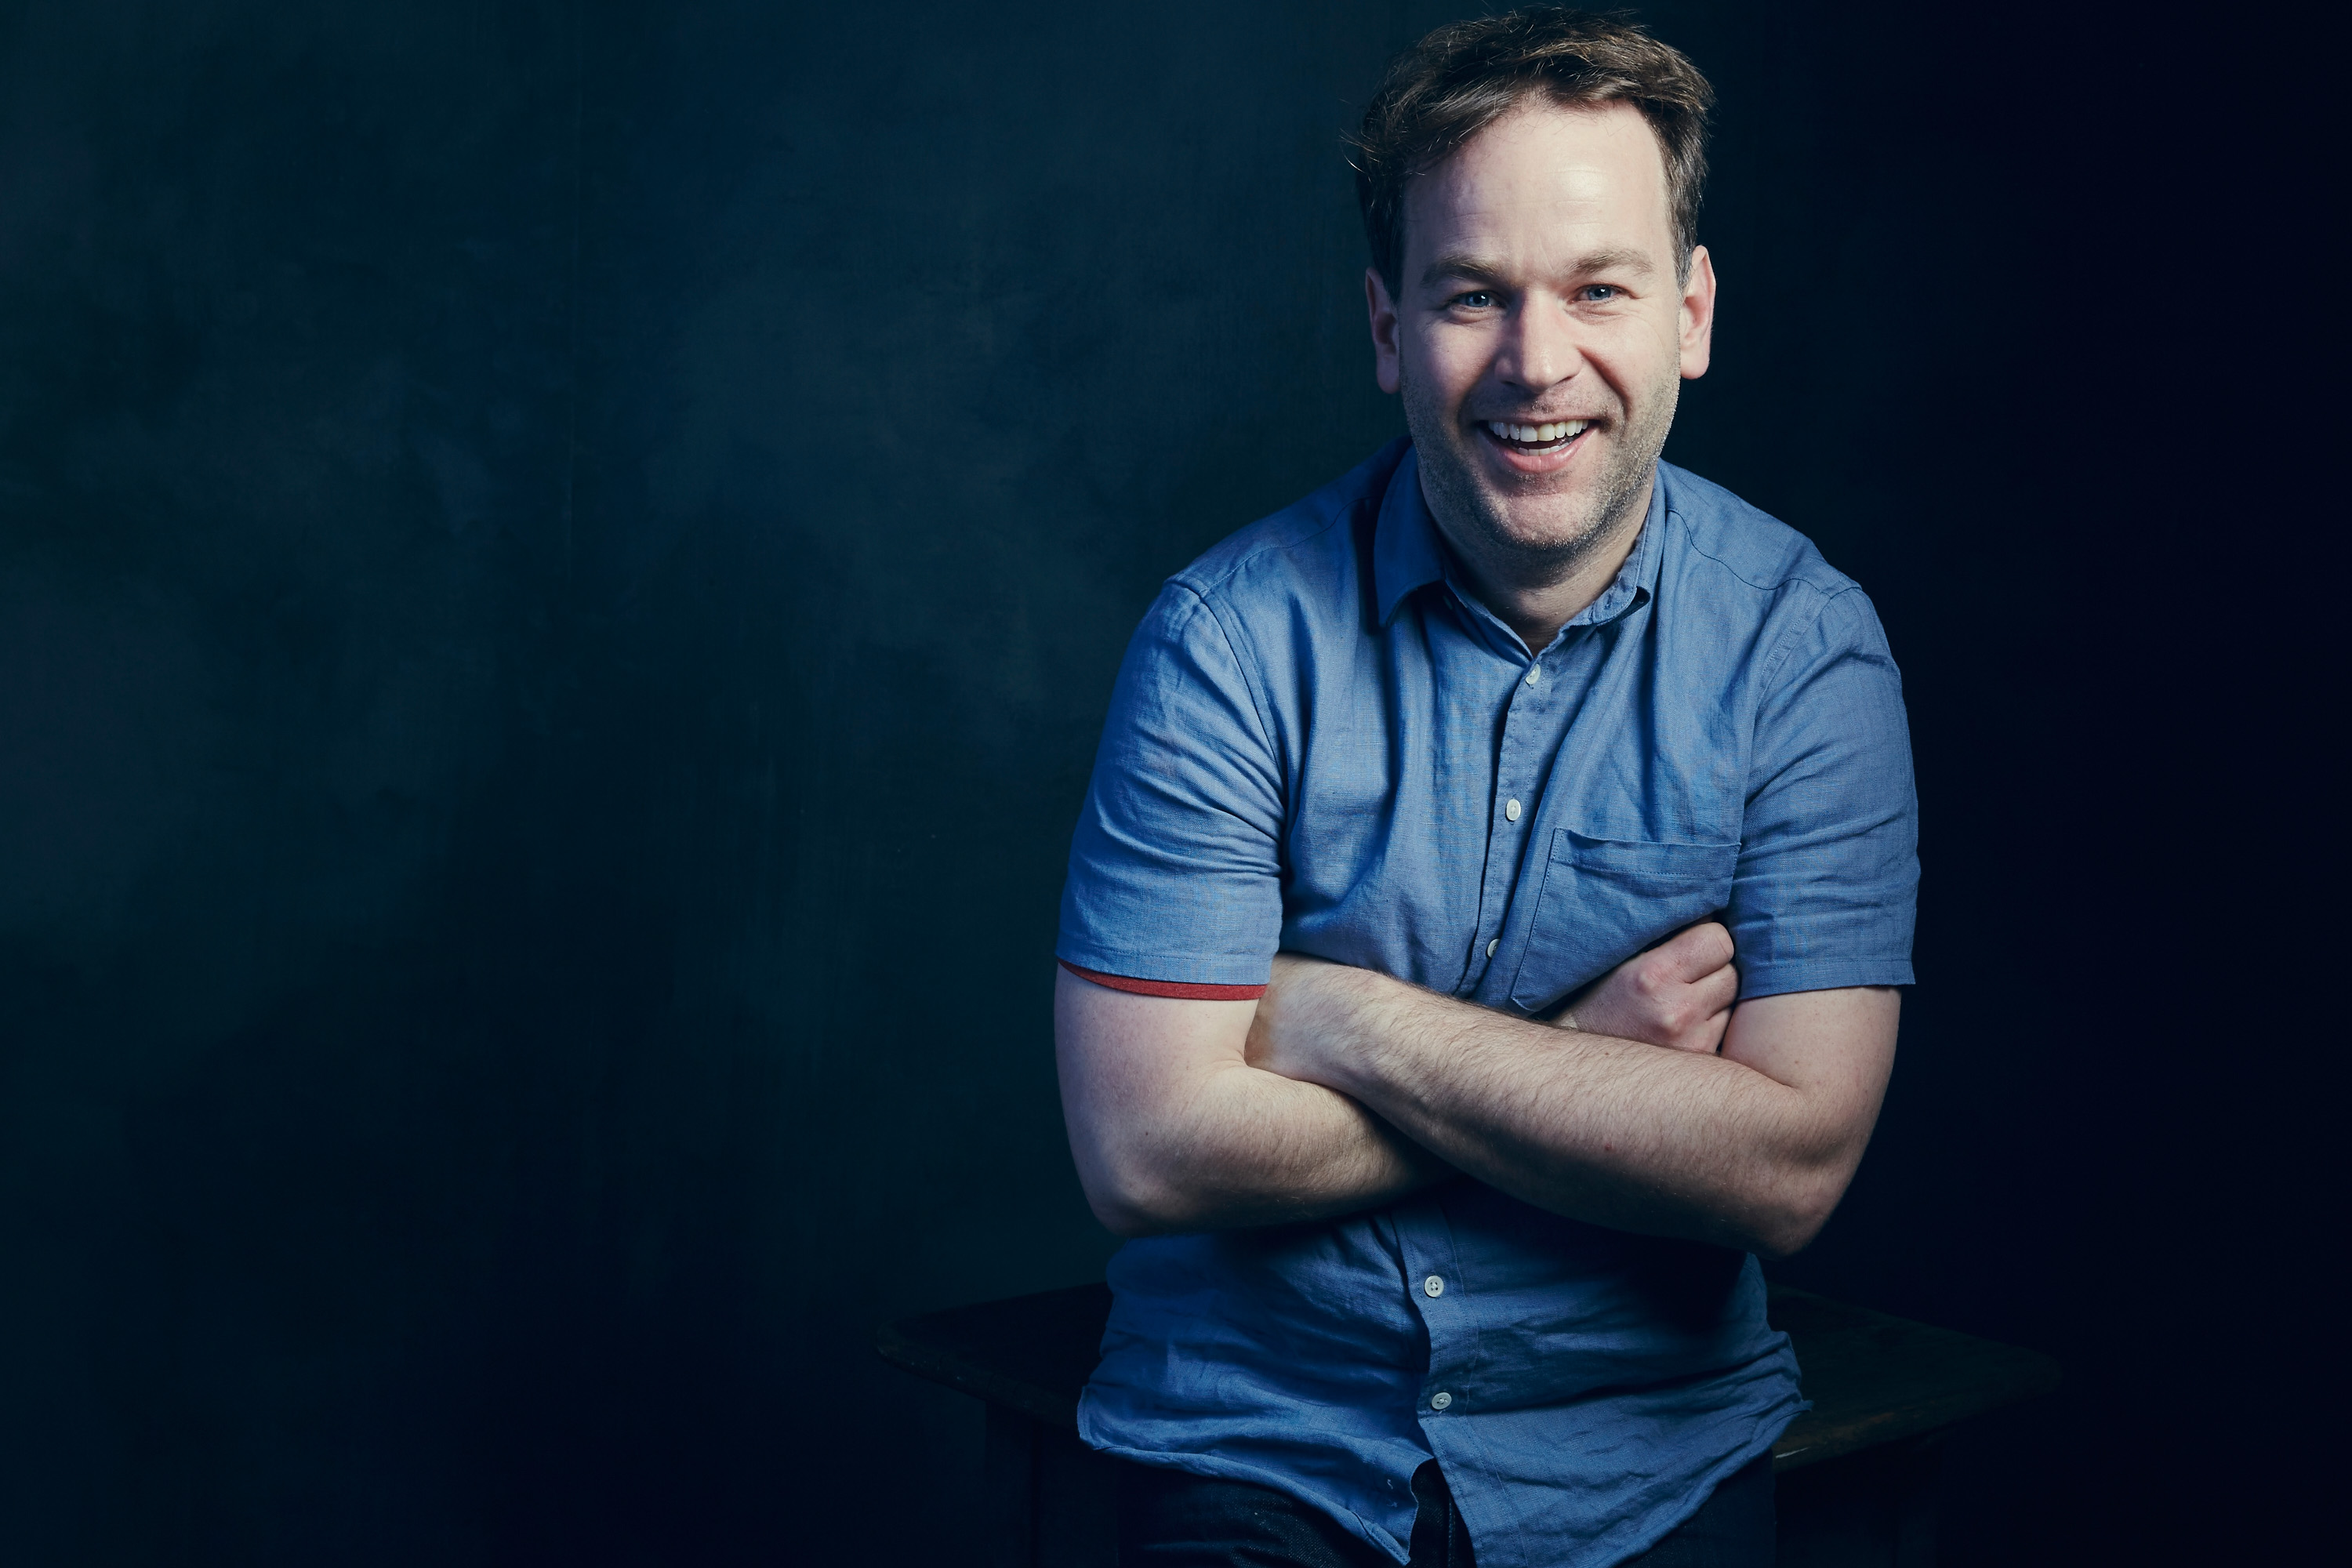 Mike Birbiglia in the Getty Images SXSW Portrait Studio on March 13, 2016 in Austin, Texas. (Smallz &amp; Raskind—Getty Images for Samsung)